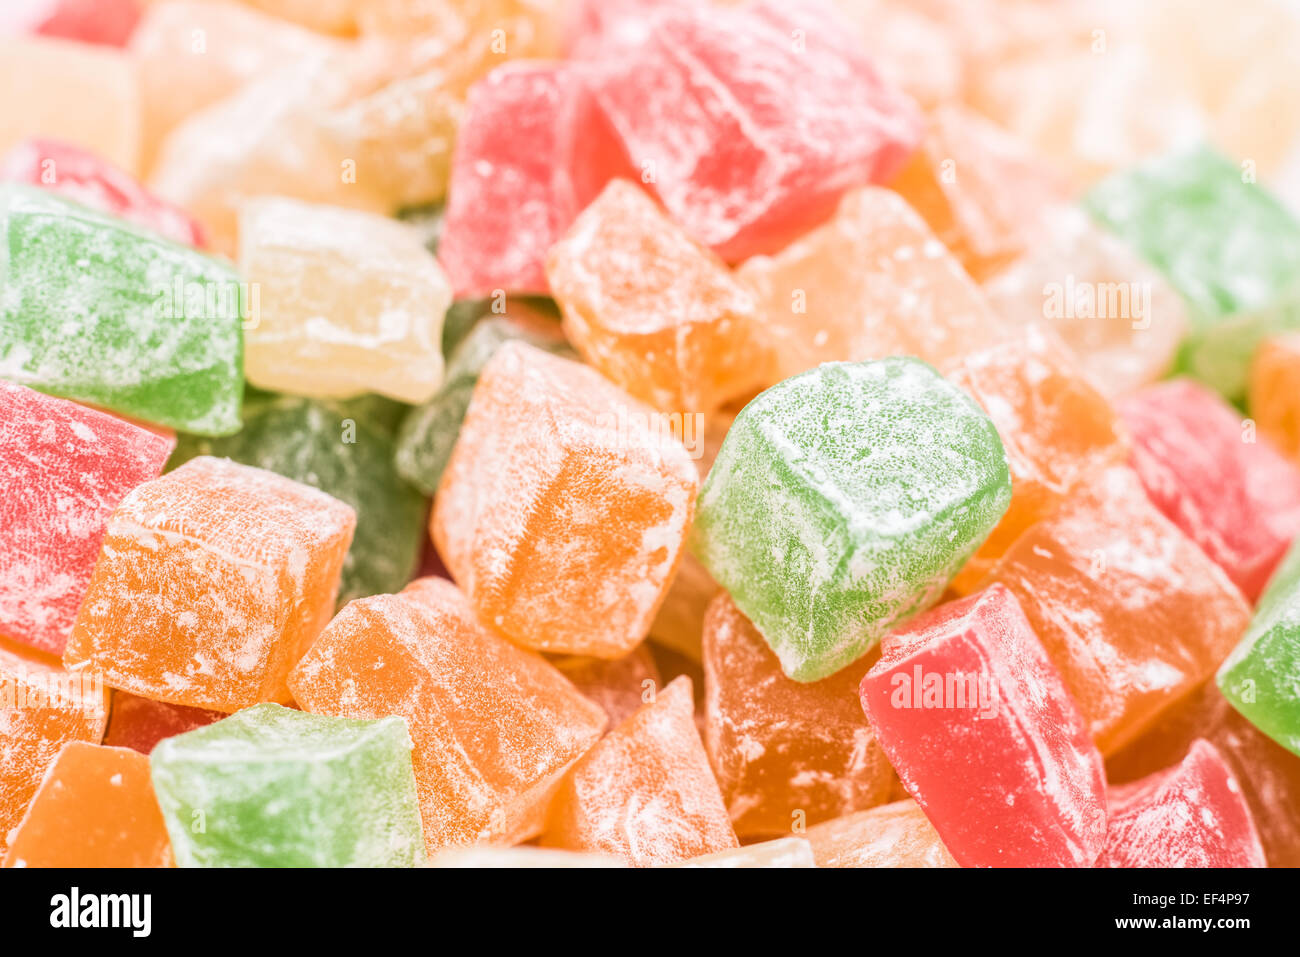 Turkish Delight Sweets With Powdered Sugar Close Up Stock Photo